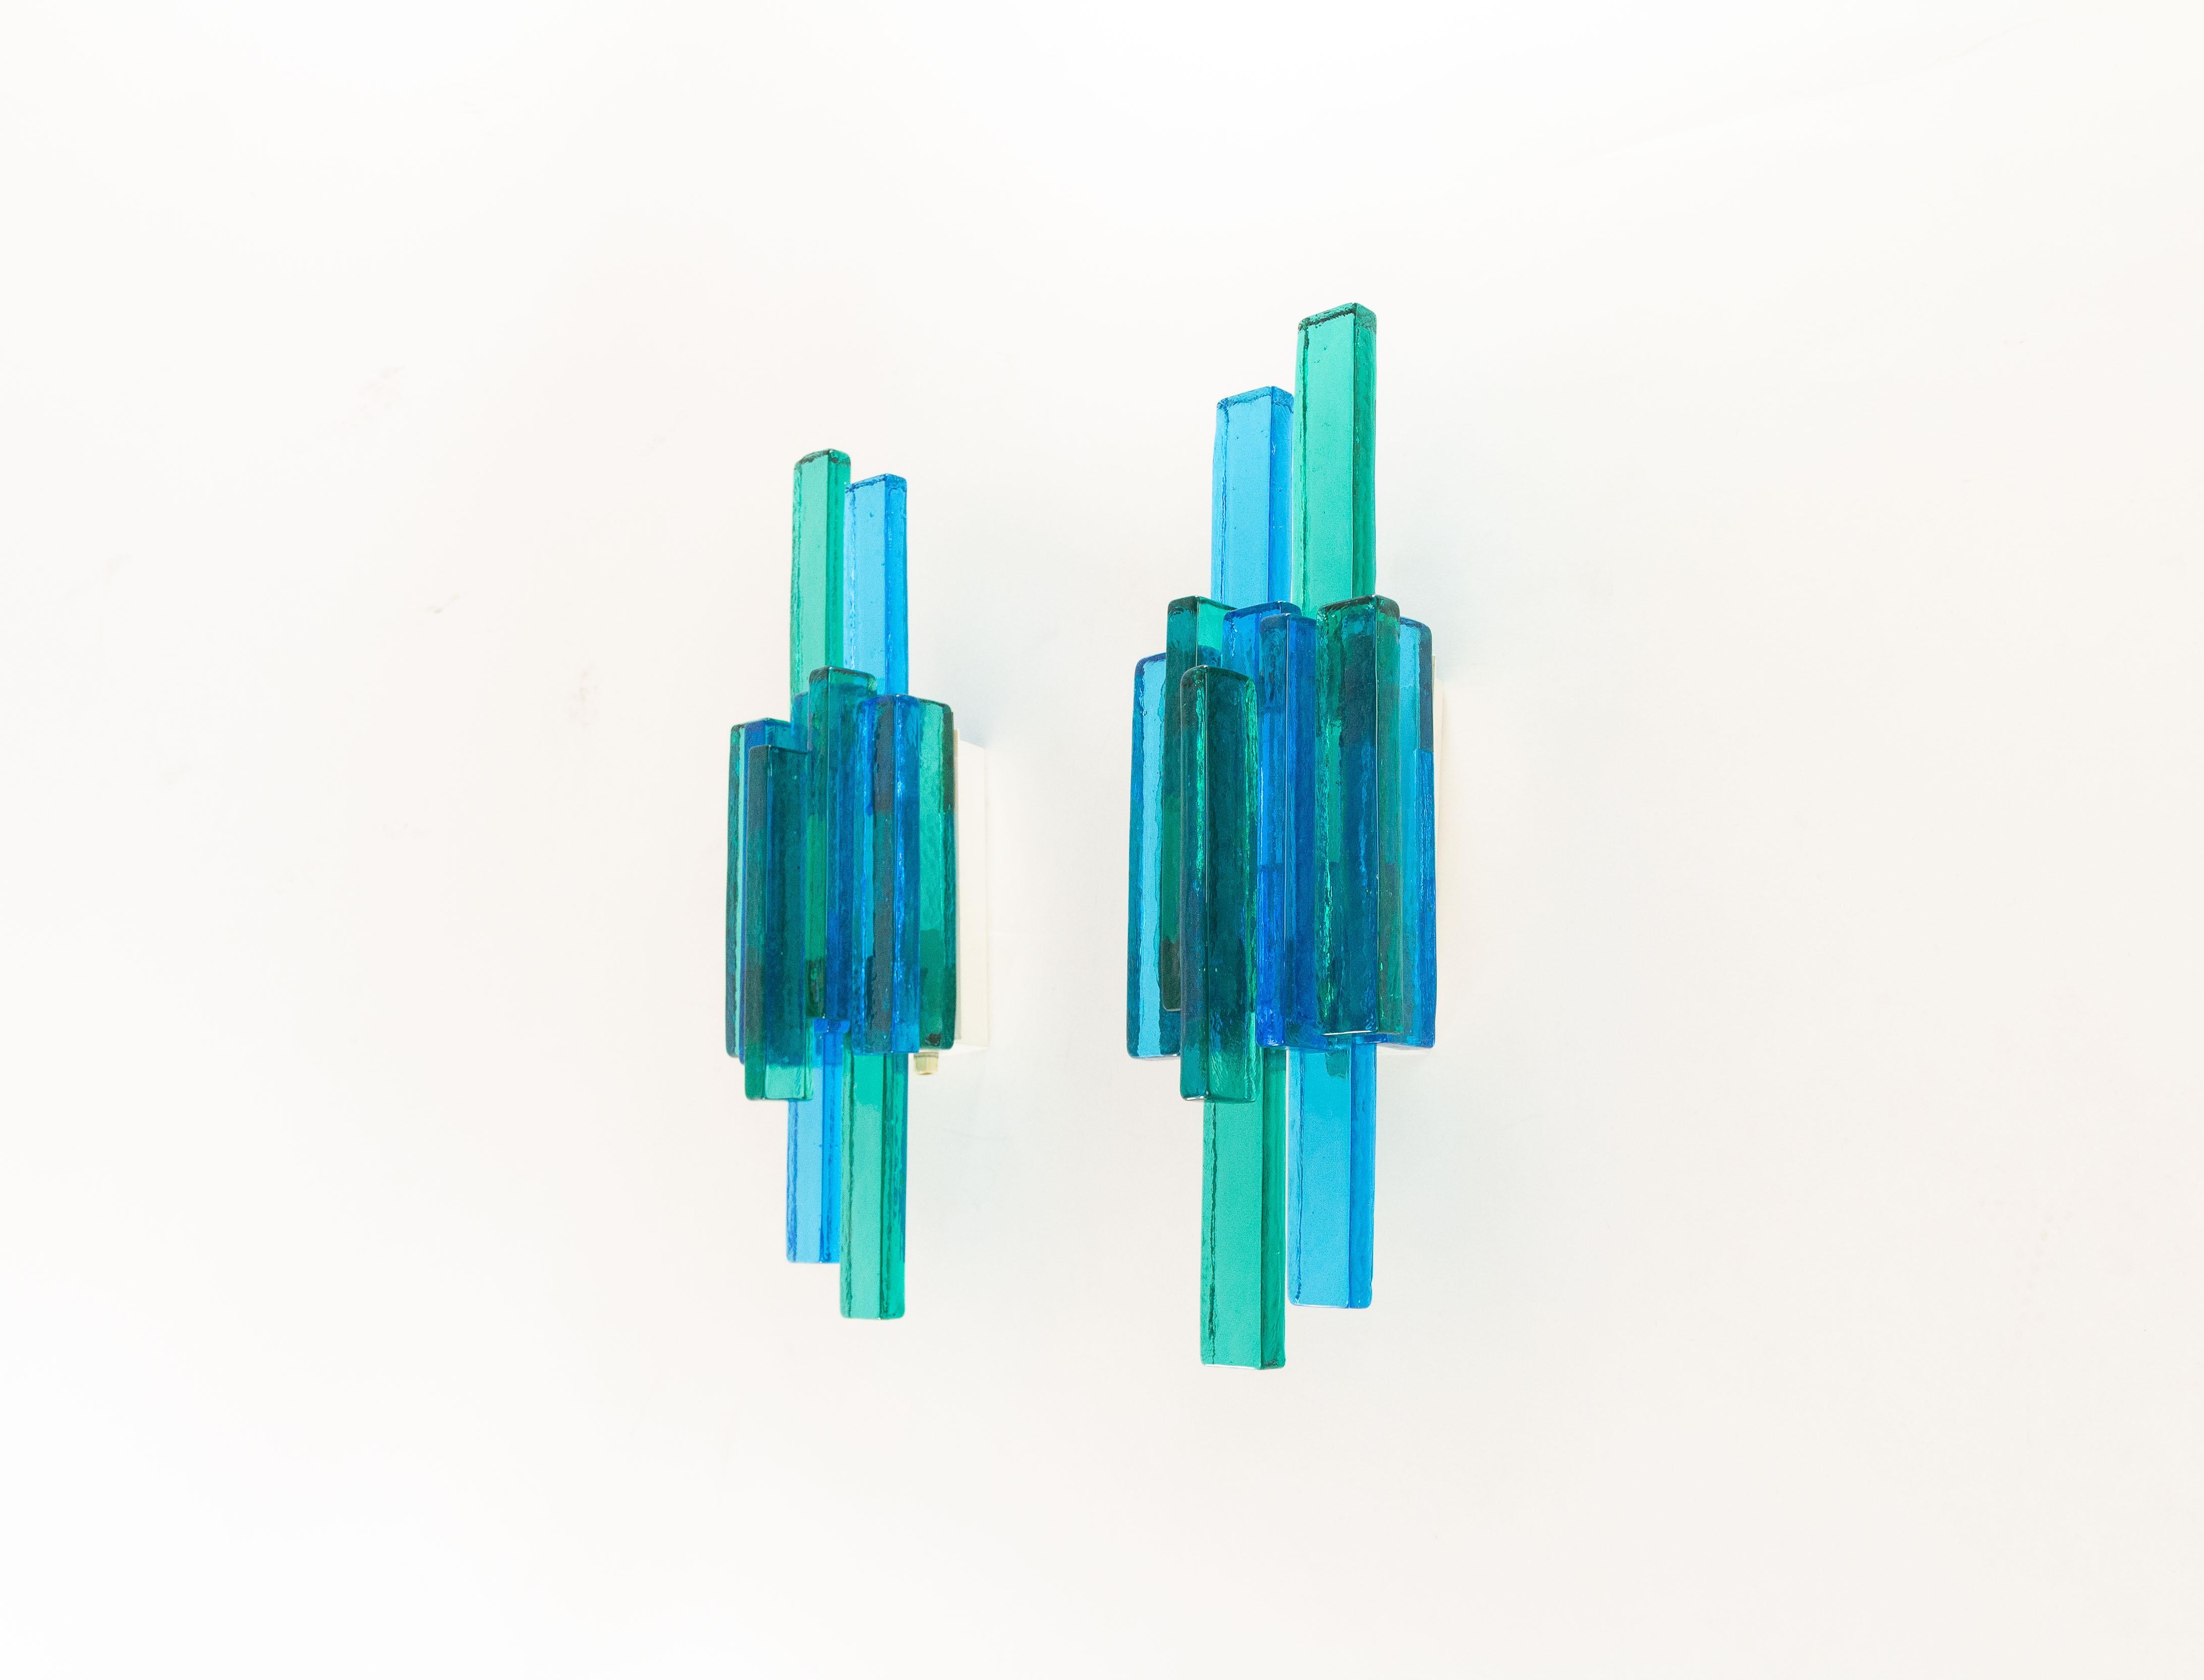 A pair of glass wall lamps designed by Svend Aage Holm Sørensen for his own company, Holm Sørensen & Co. 

Beautifully designed with marine and dark blue colored glass, granting the lamps a striking appearance.